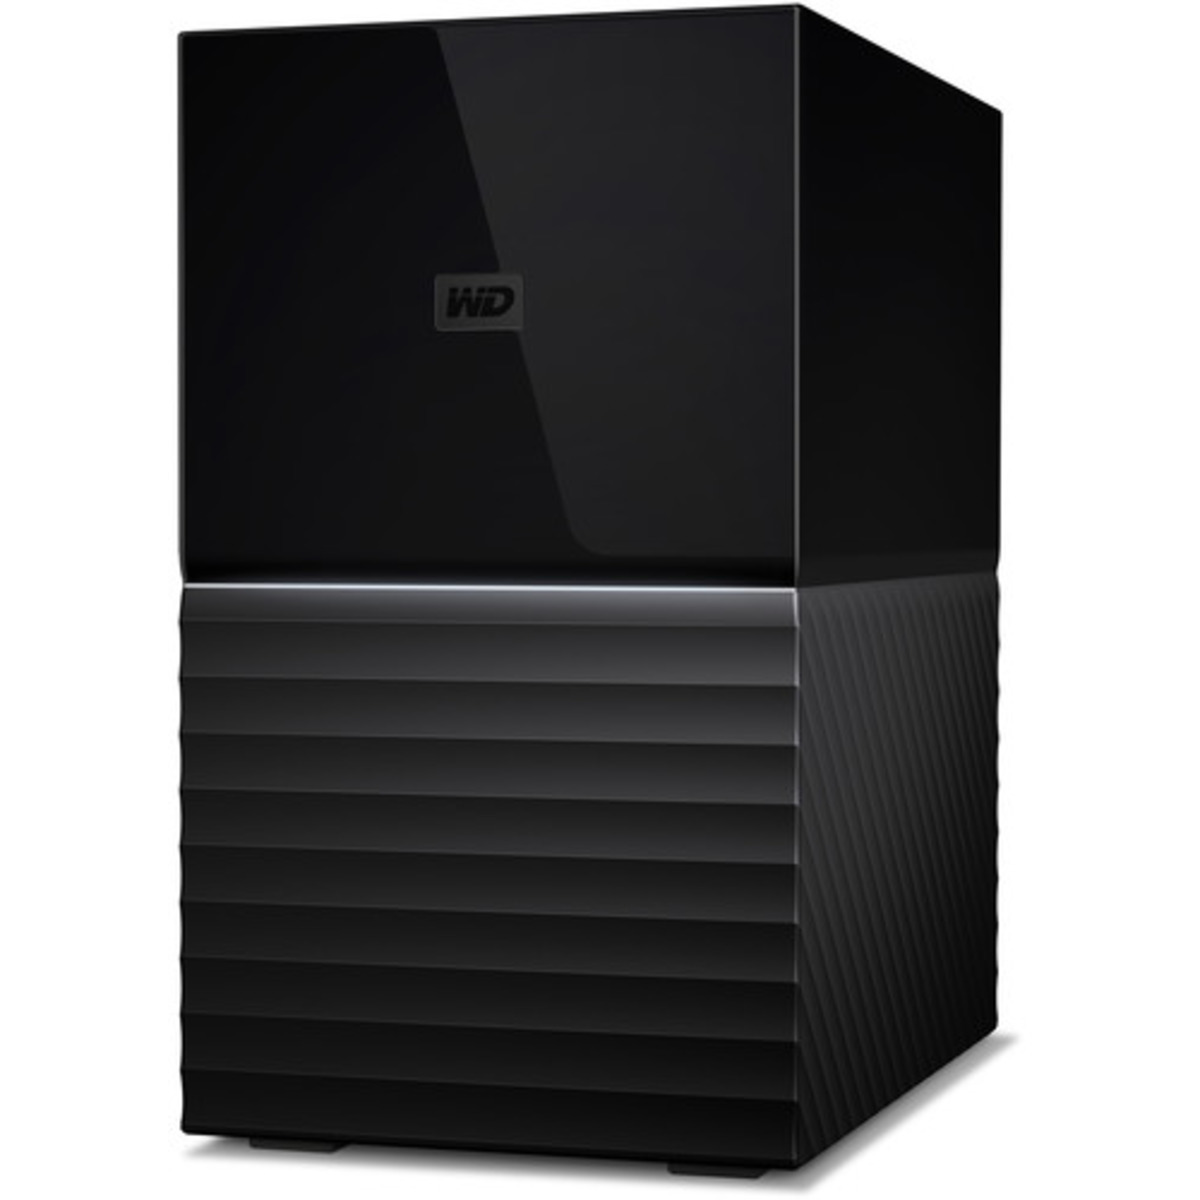 Western Digital My Book DUO Gen 2 8tb 2-Bay Desktop Personal / Basic Home / Small Office DAS - Direct Attached Storage Device 2x4tb Western Digital Blue WD40EZRZ 3.5 5400rpm SATA 6Gb/s HDD CONSUMER Class Drives Installed - Burn-In Tested - ON SALE My Book DUO Gen 2